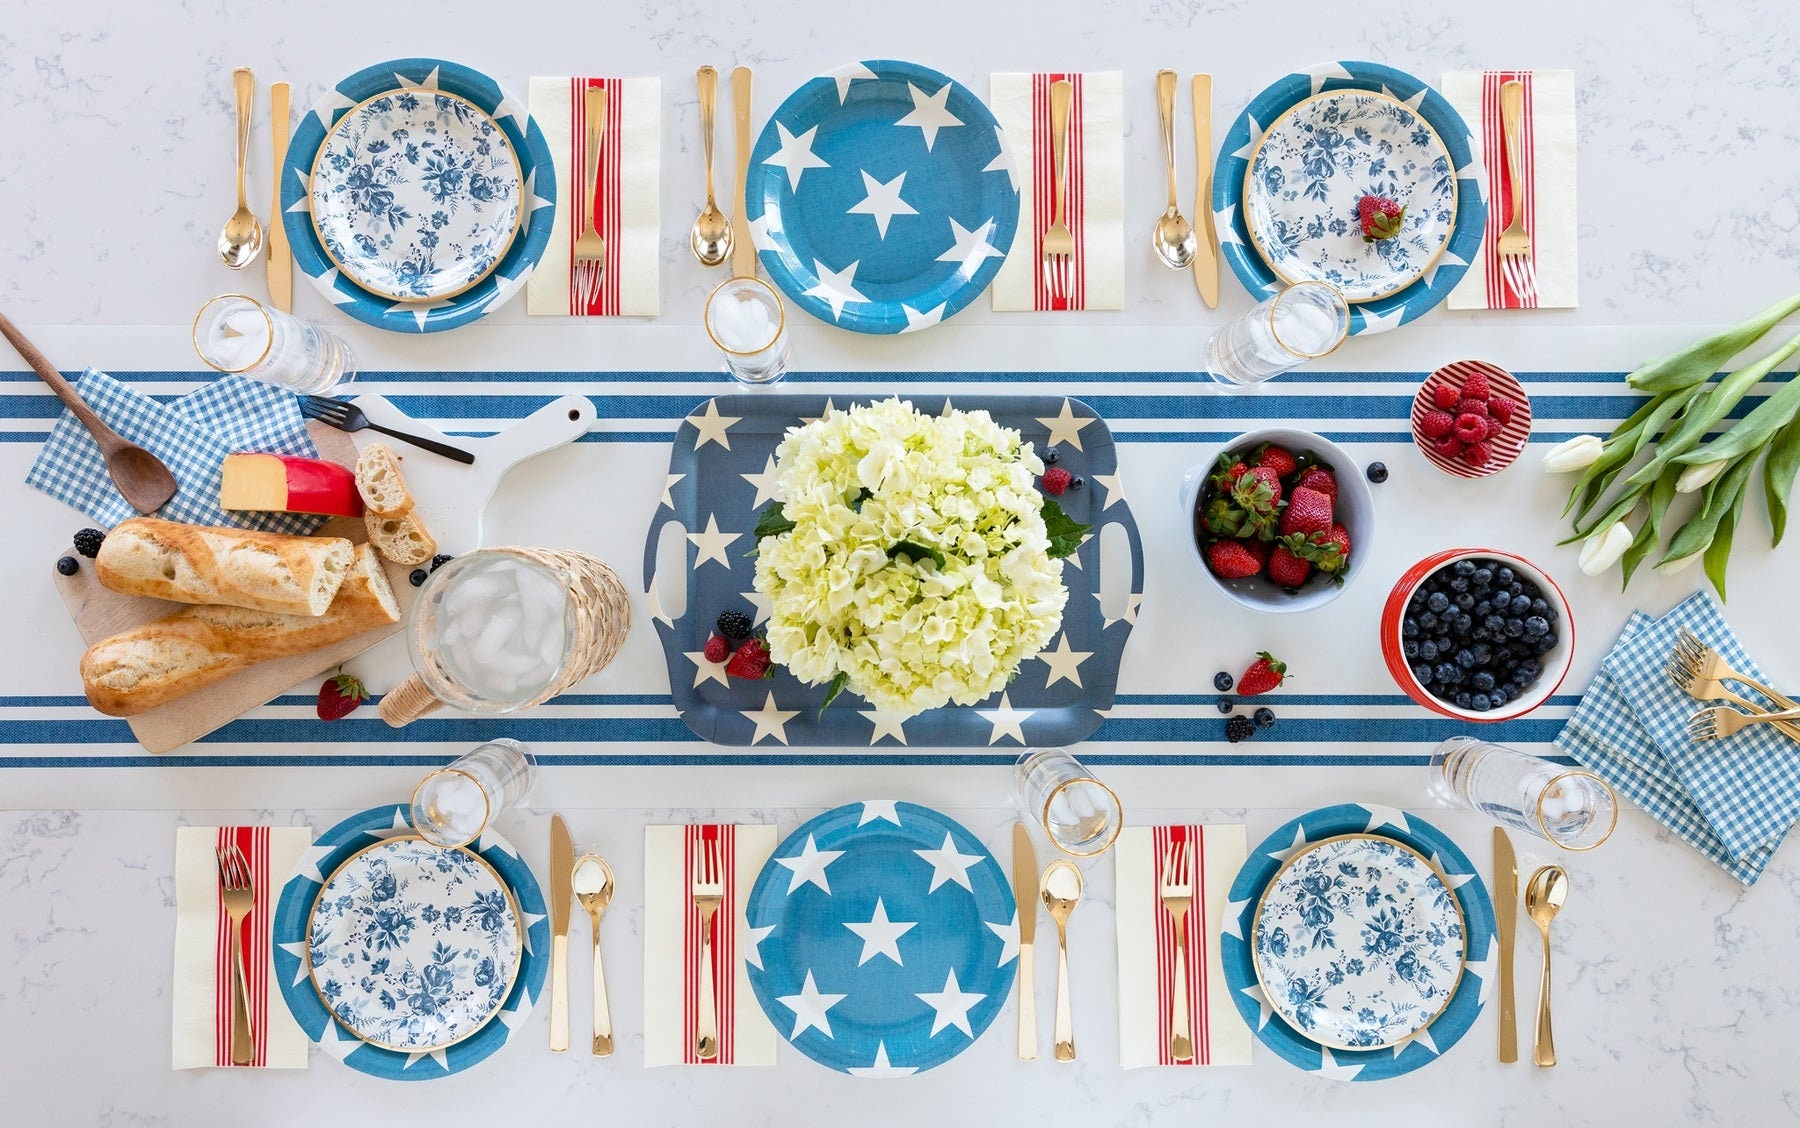 Hamptons Blue Star Dinner Plate / July 4th Tableware / Patriotic Blue Star Plate / Memorial Day Party / America / 4th of July BBQ Party